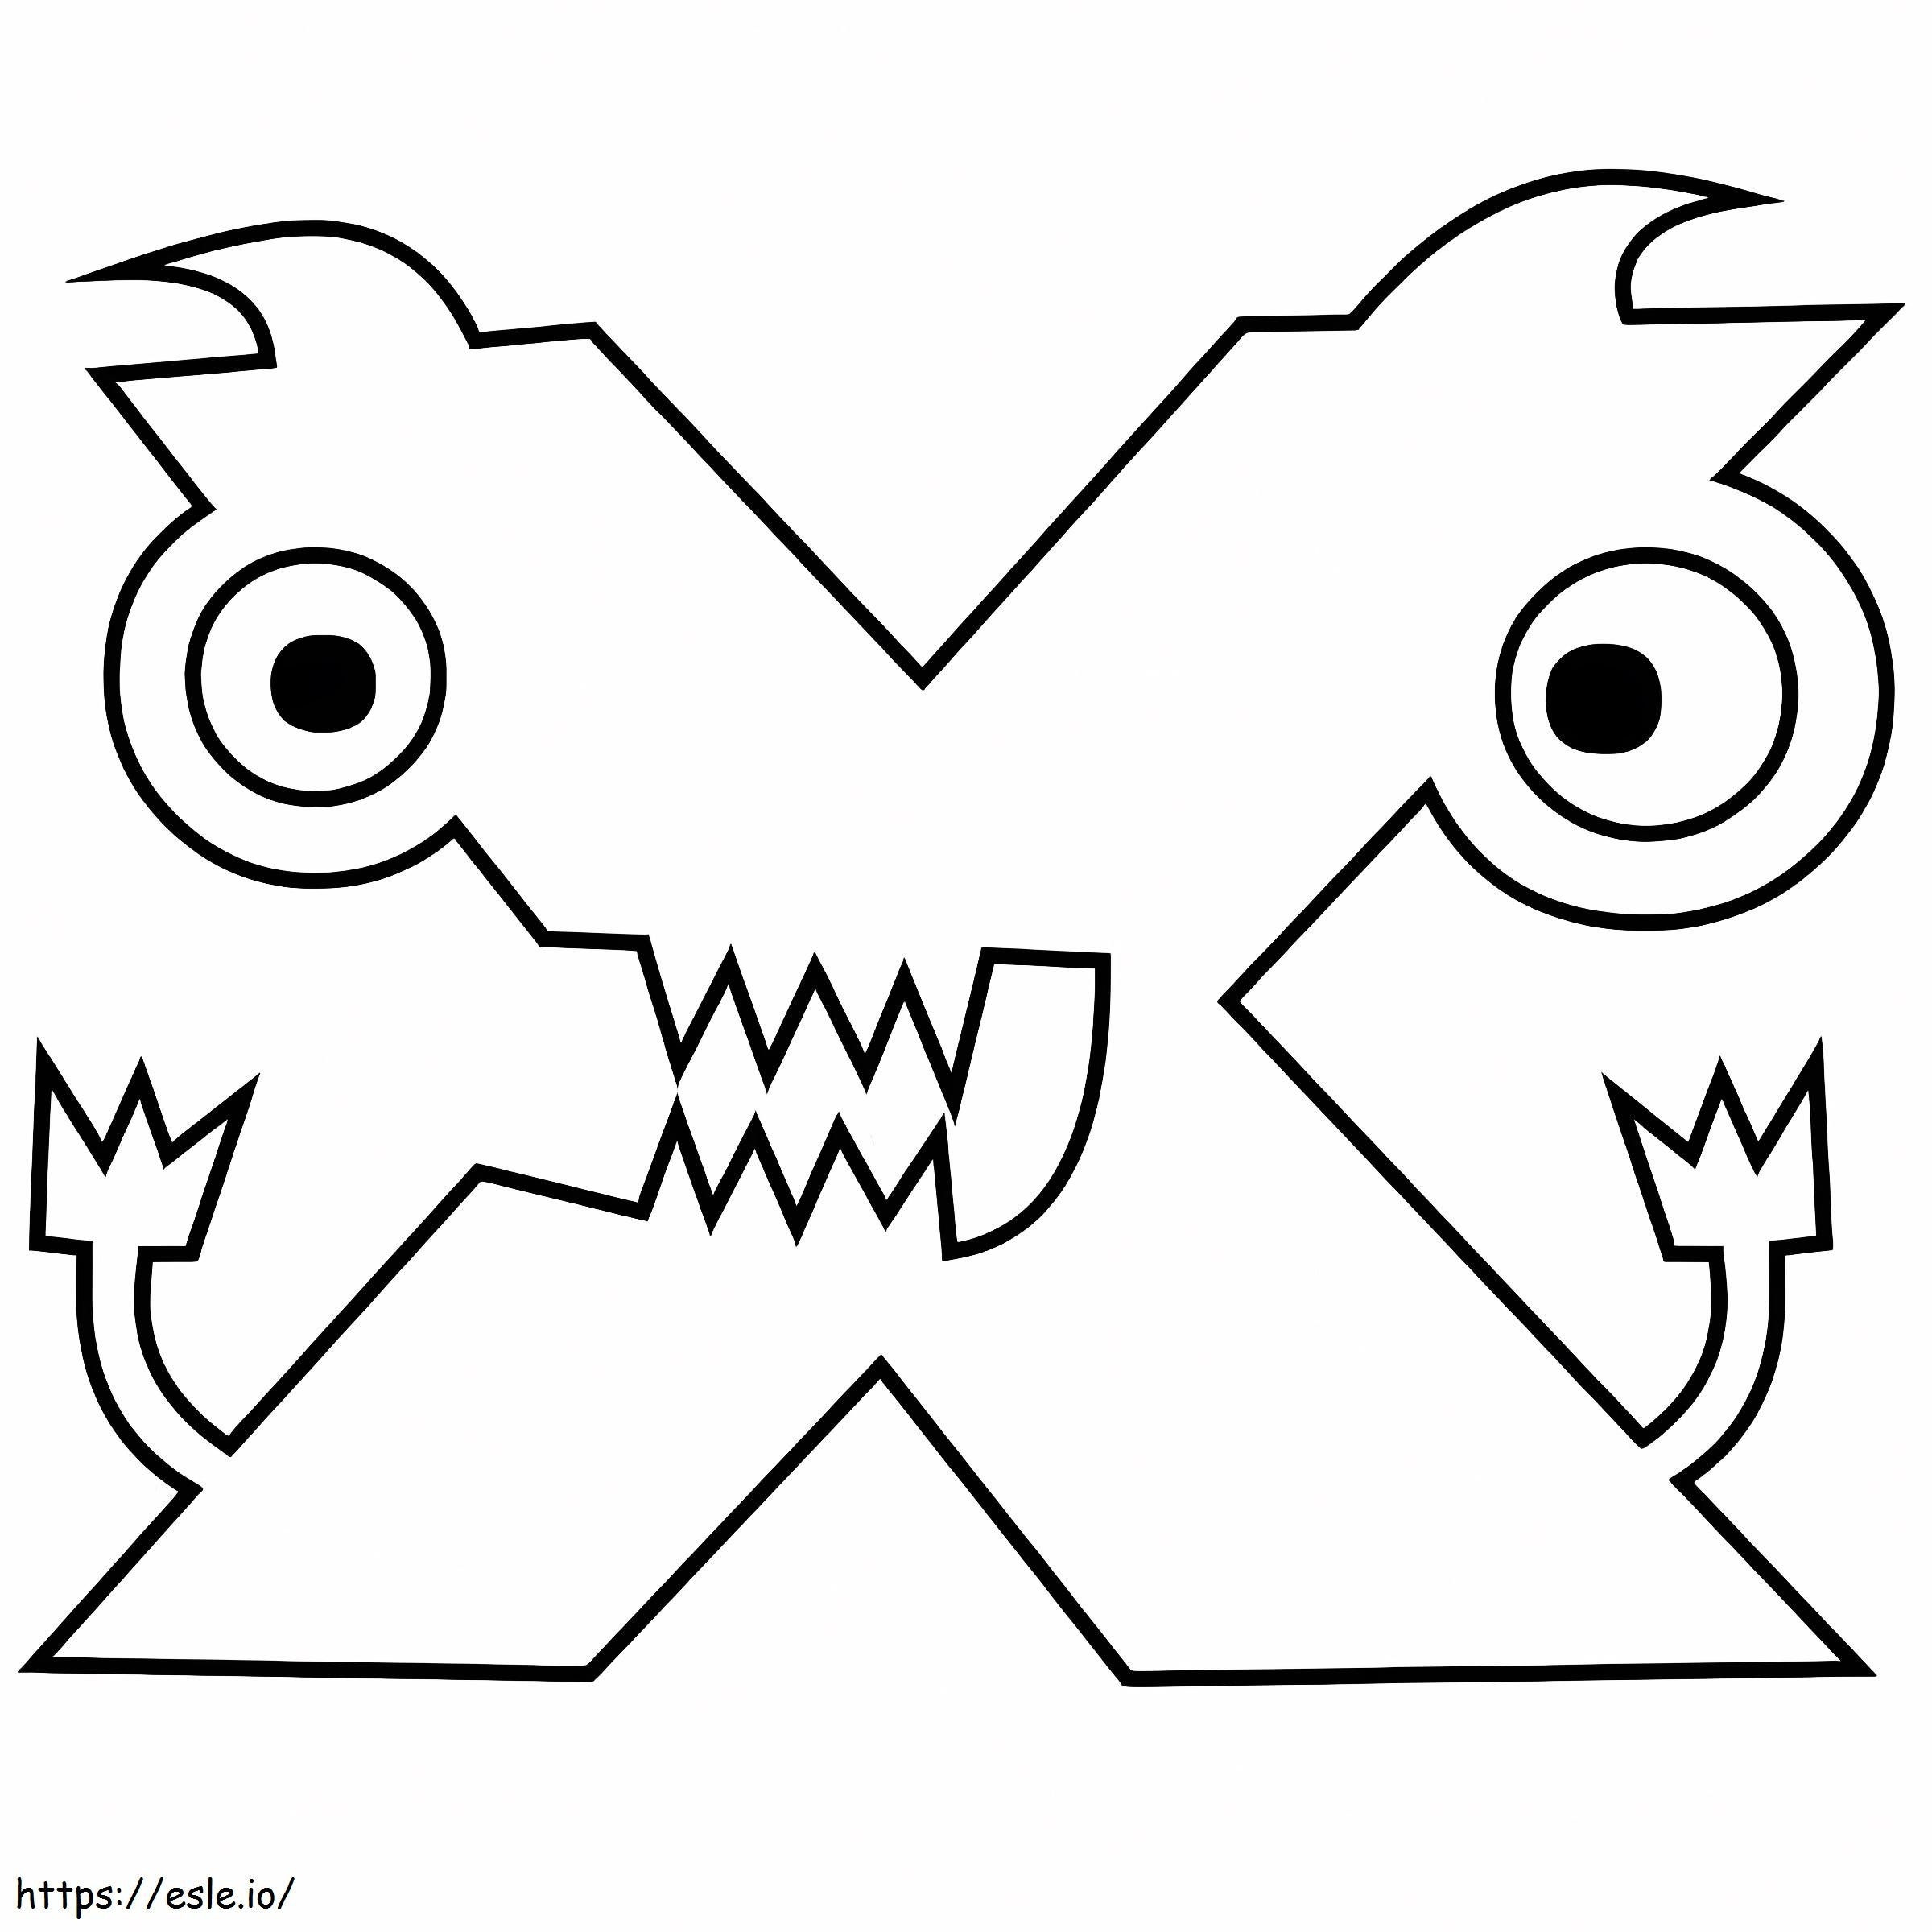 Letter X 4 coloring page